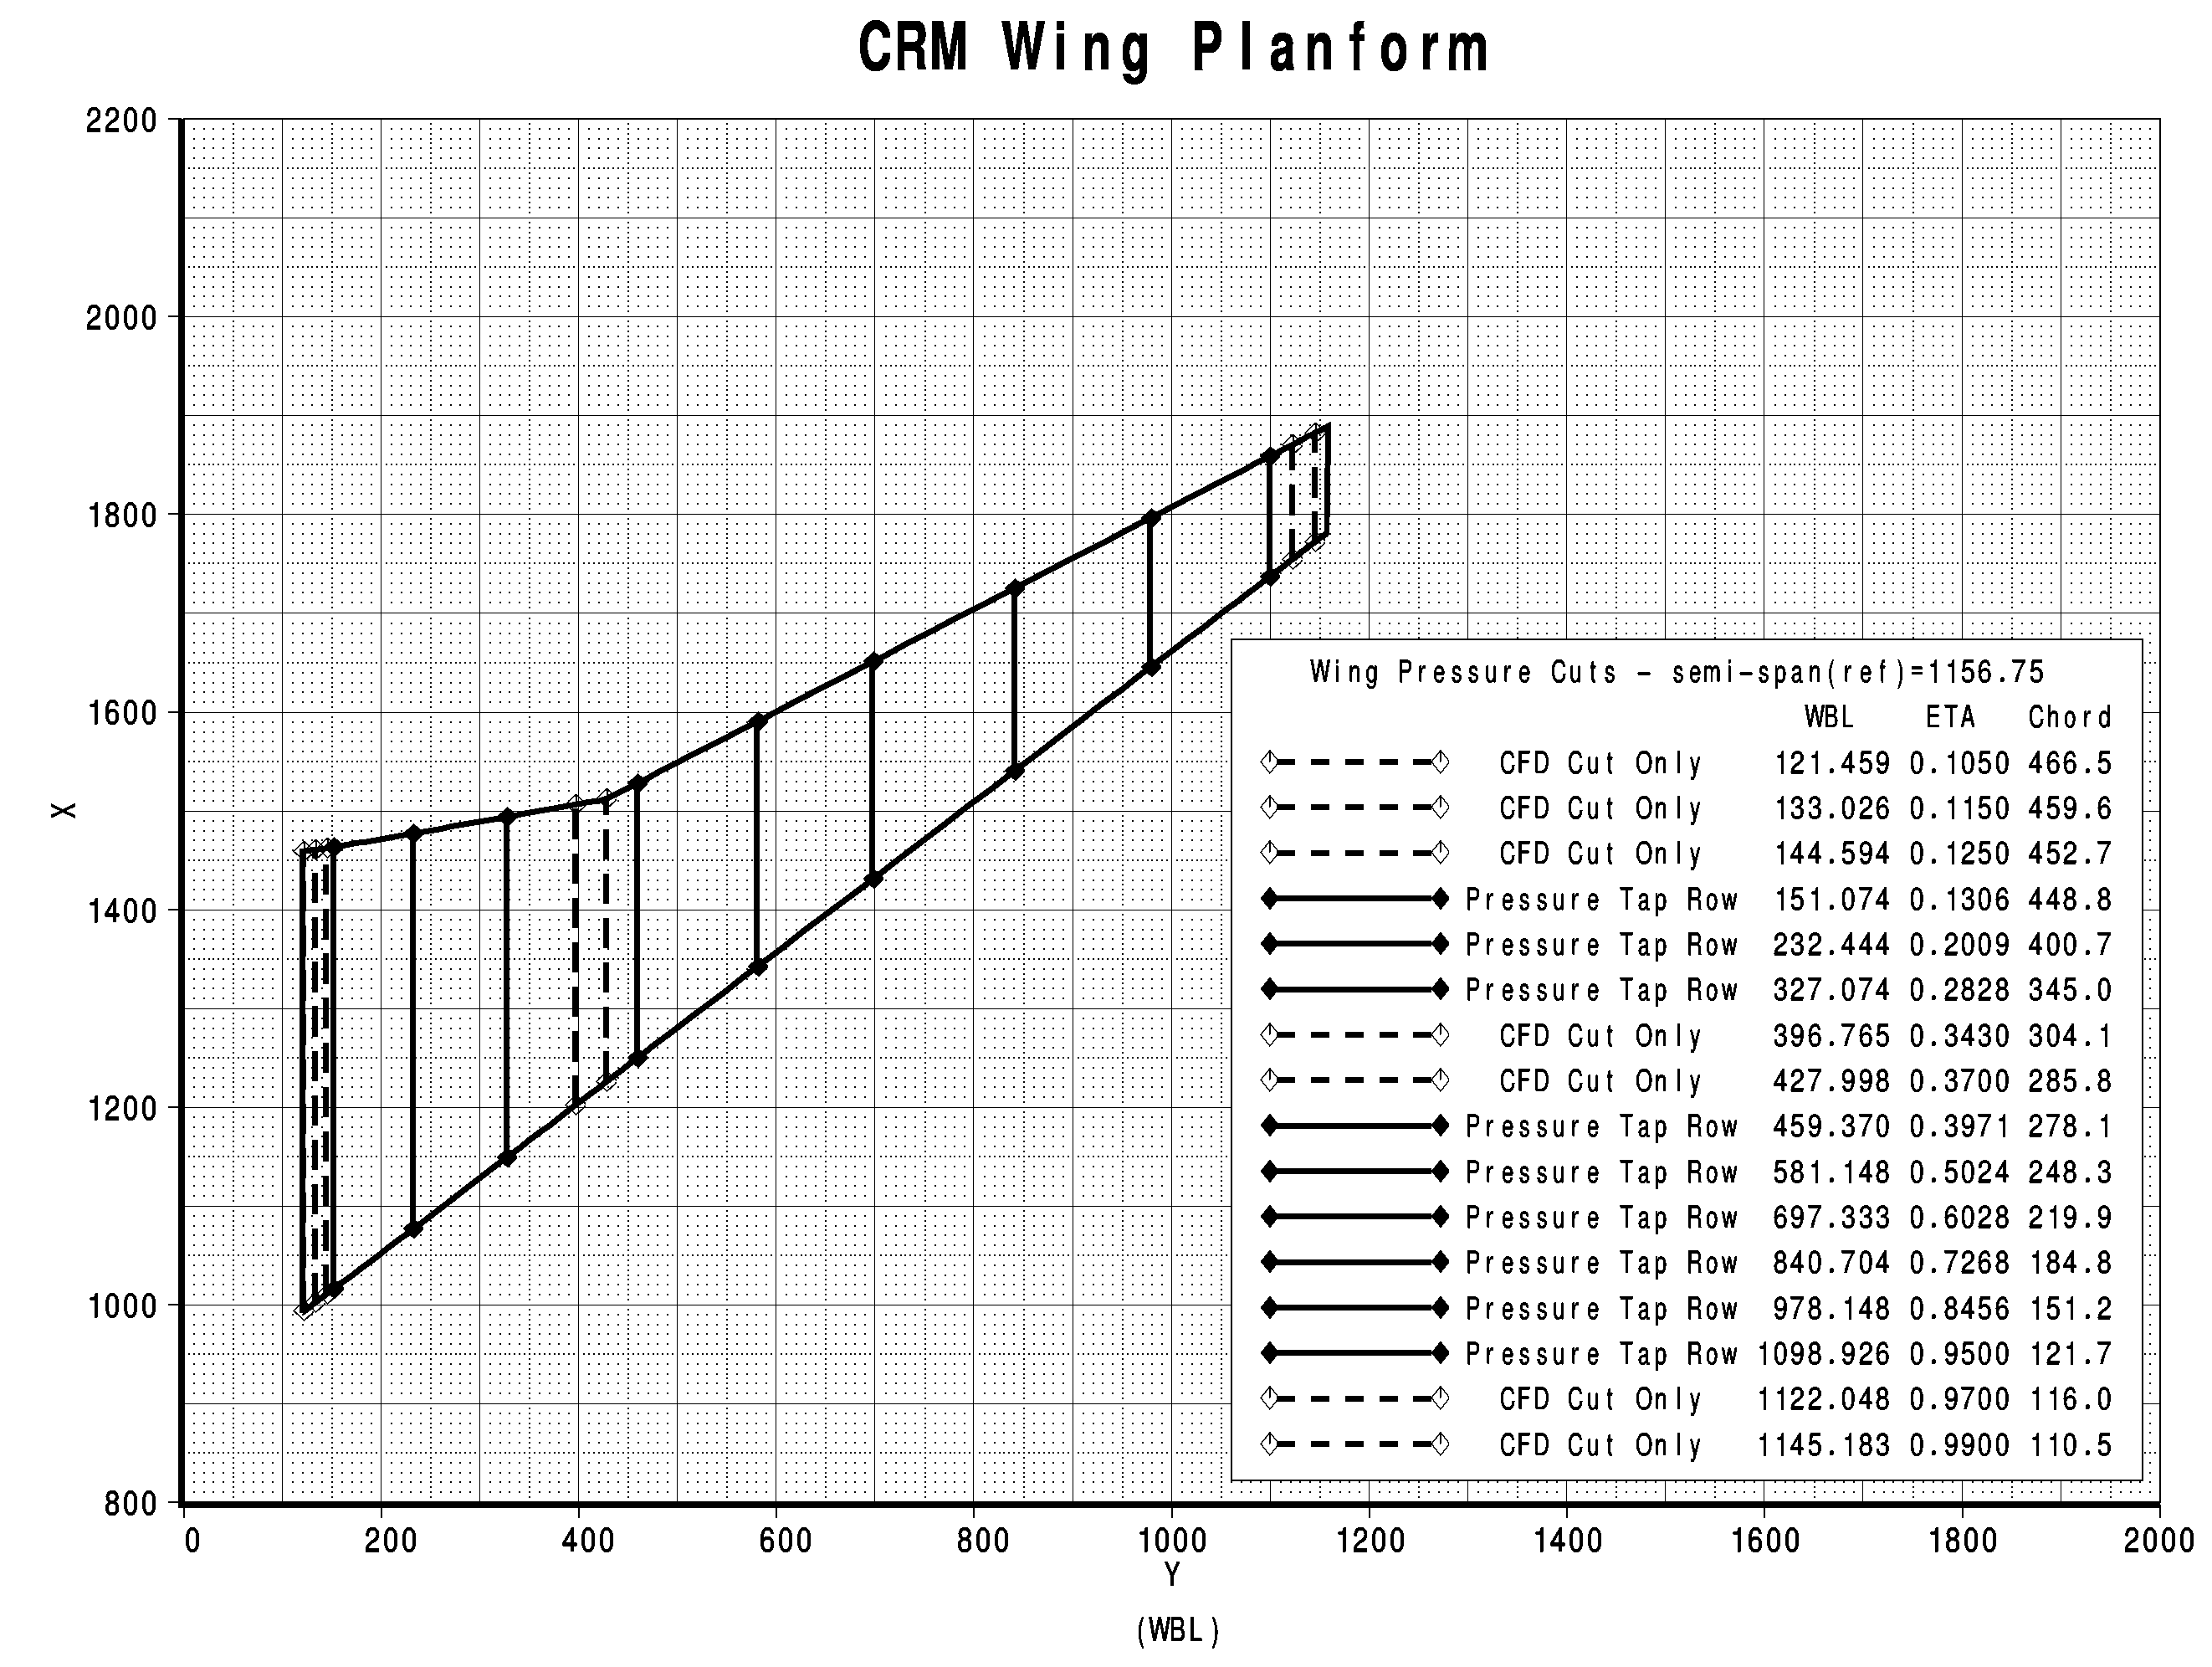 Image of CRM wing section pressure cuts